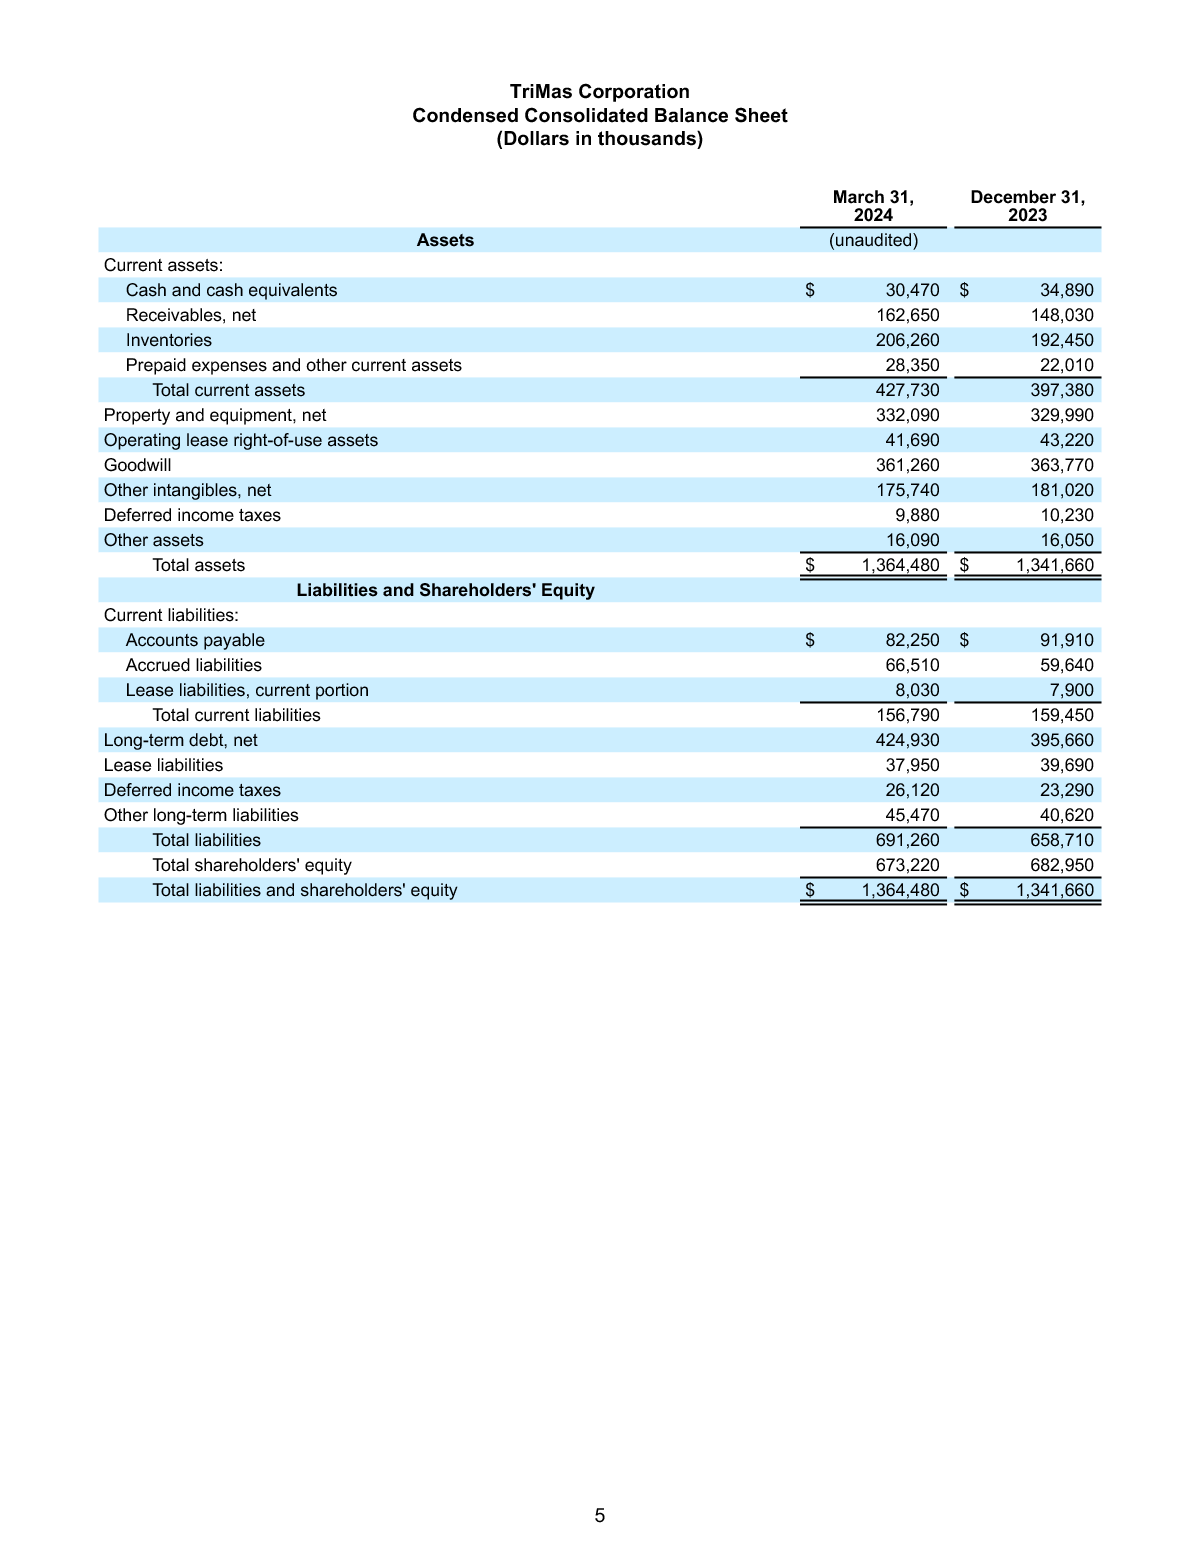 FINAL 4 30 24 Q1 Earnings Release page 5 image